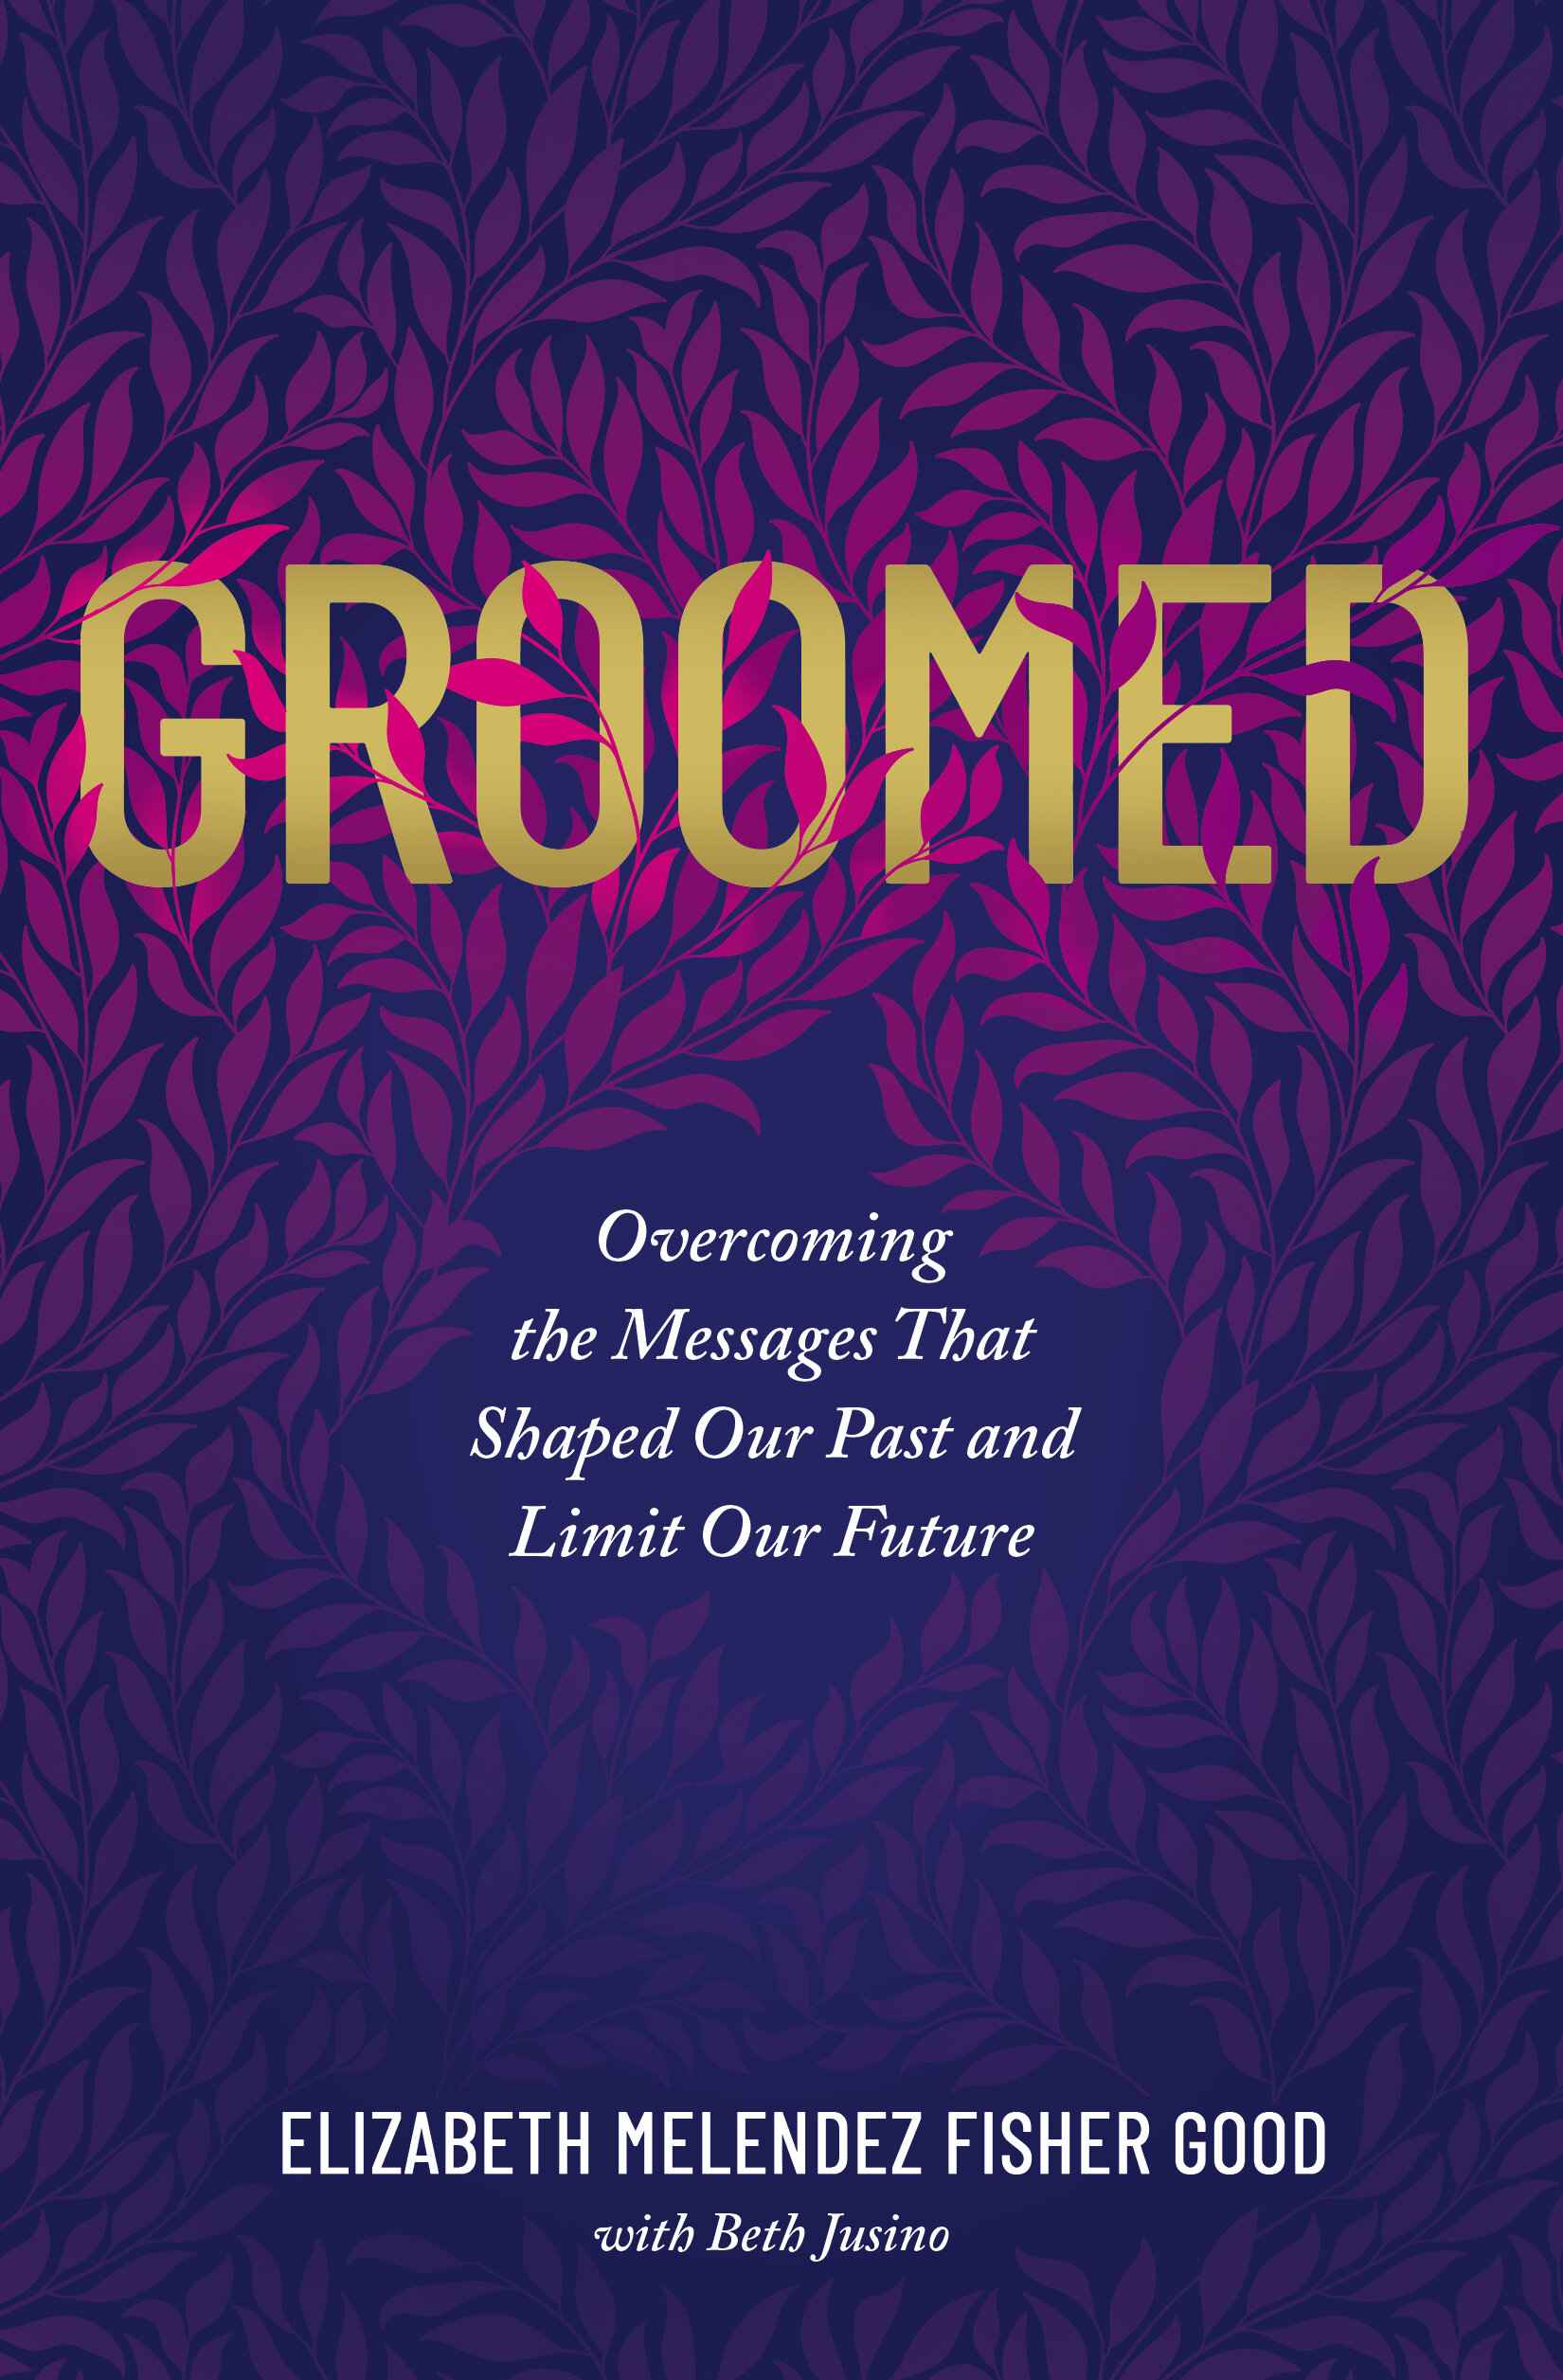 Groomed Book Cover